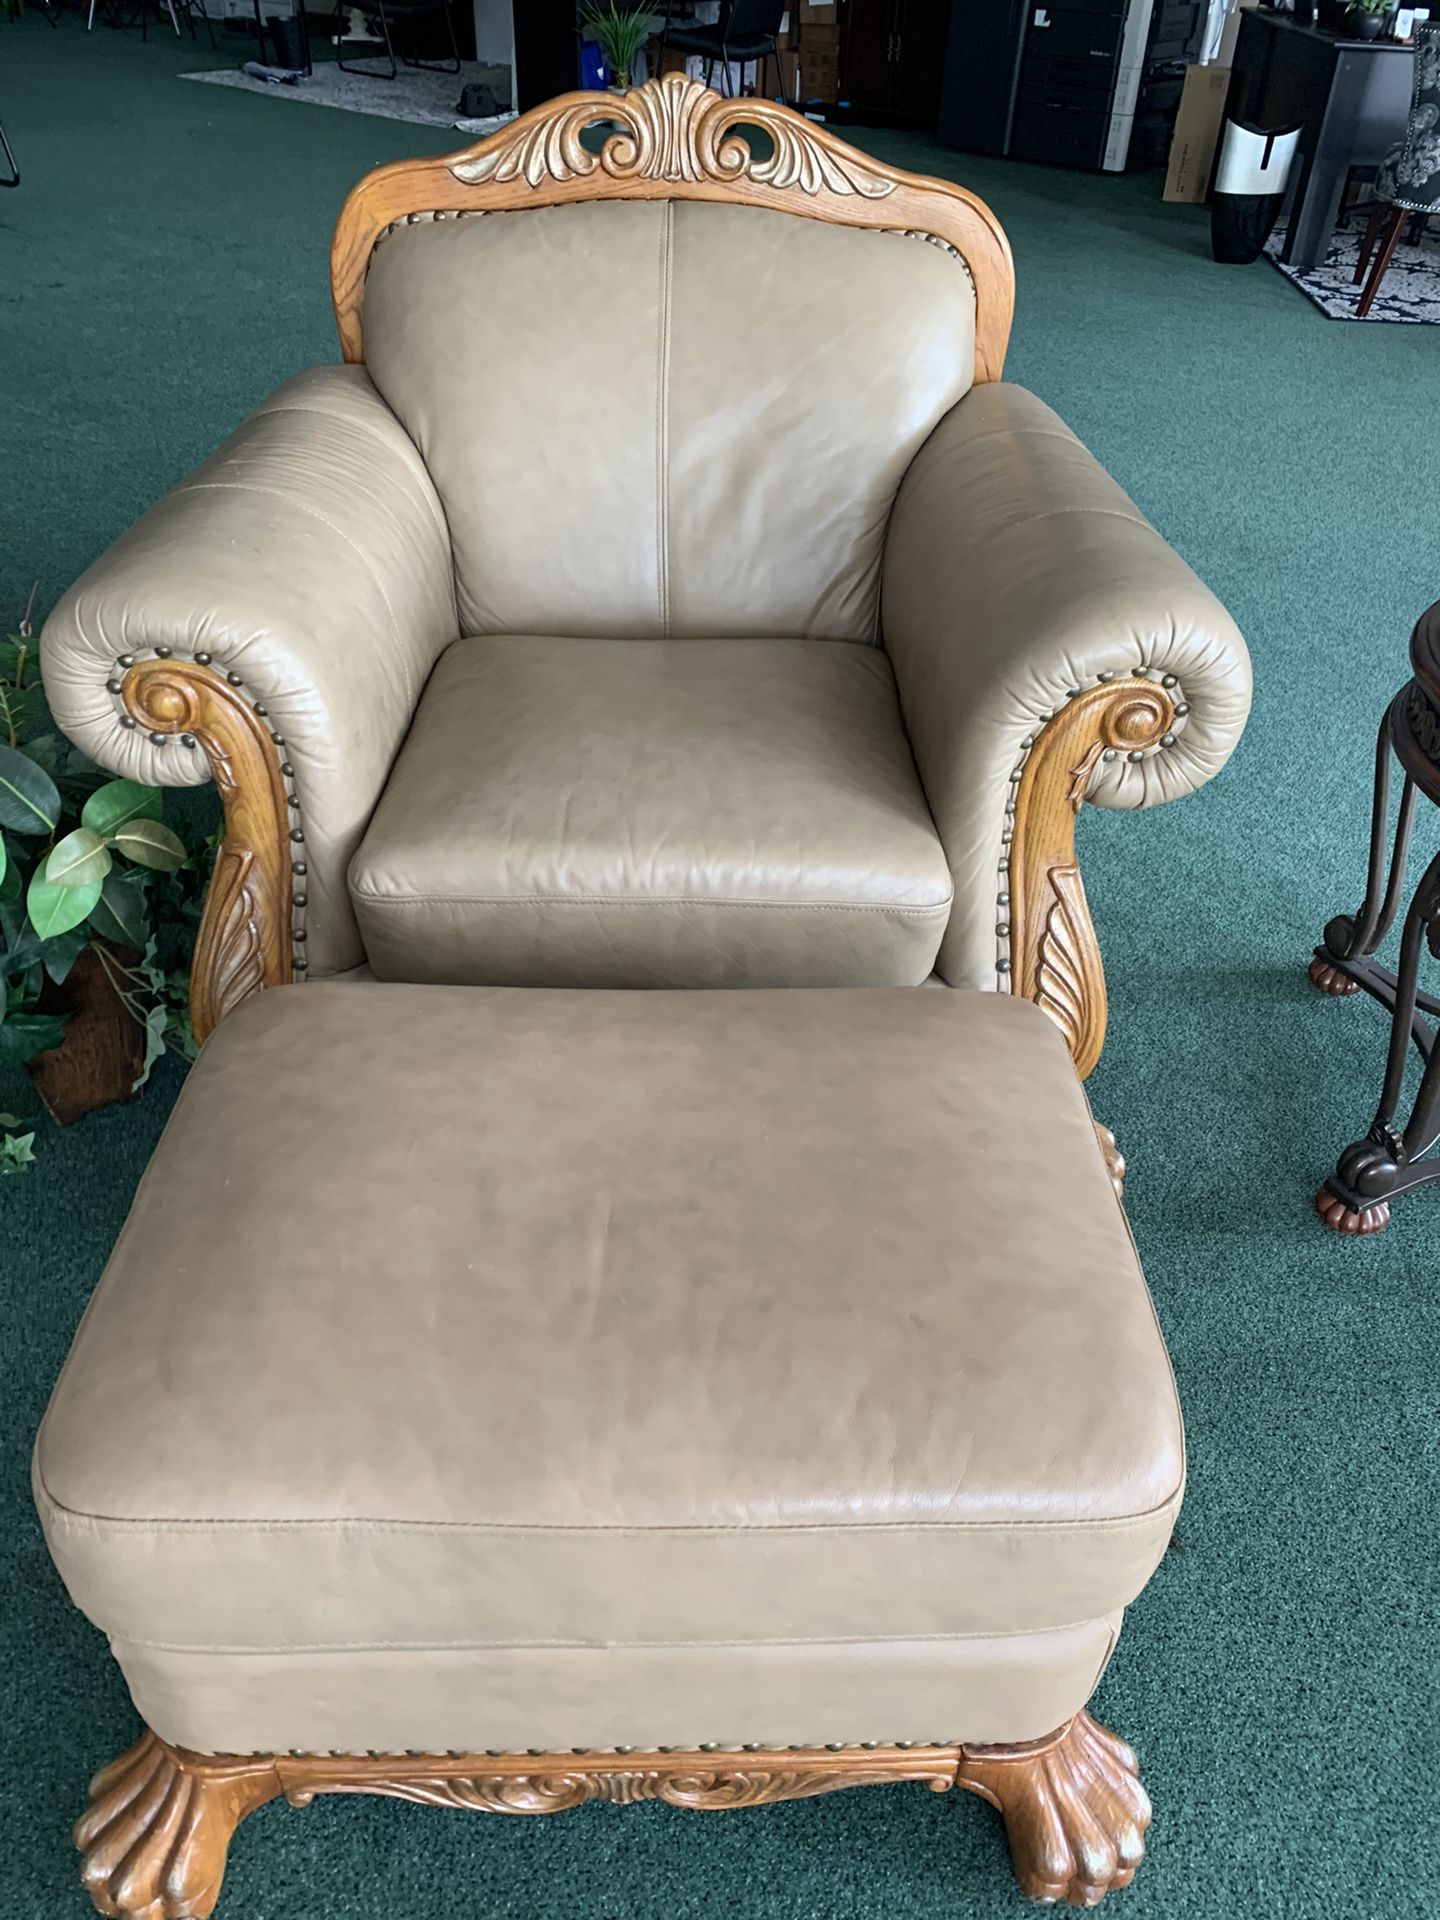 Large chair with ottoman